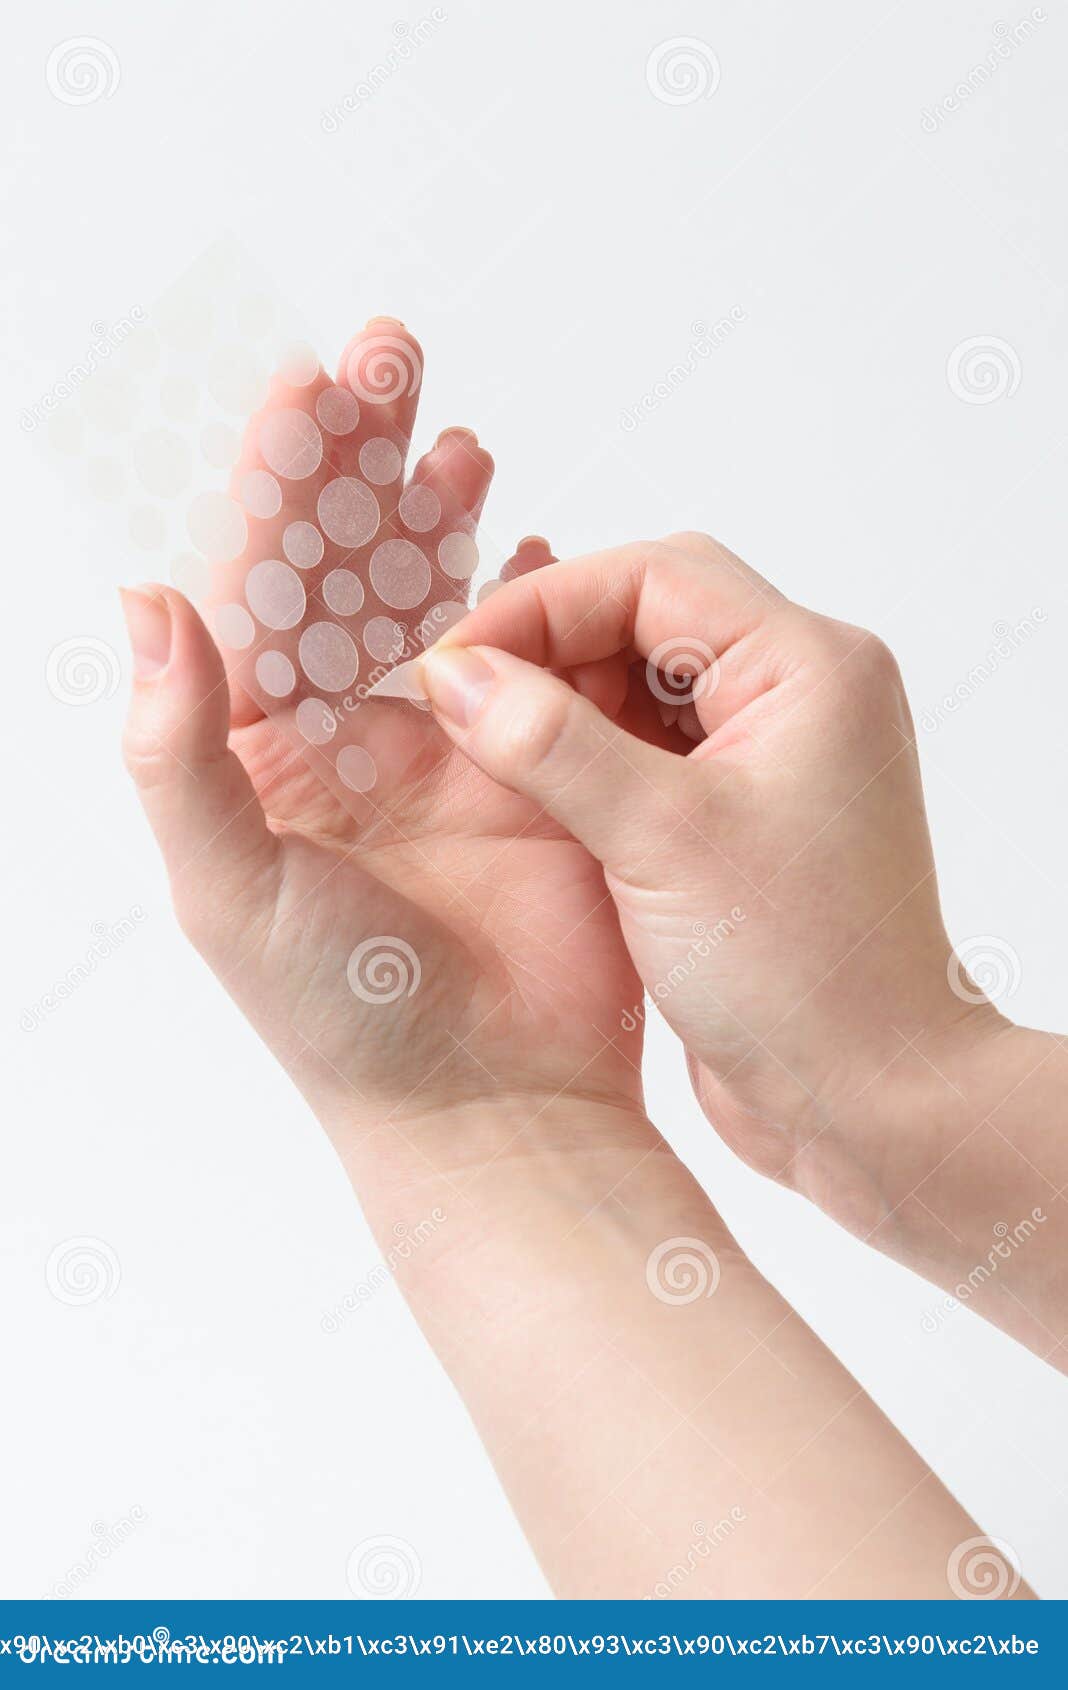 round patches for acne and wrinkles on the hands on a white background. acne and wrinkle patches for facial rejuvenation